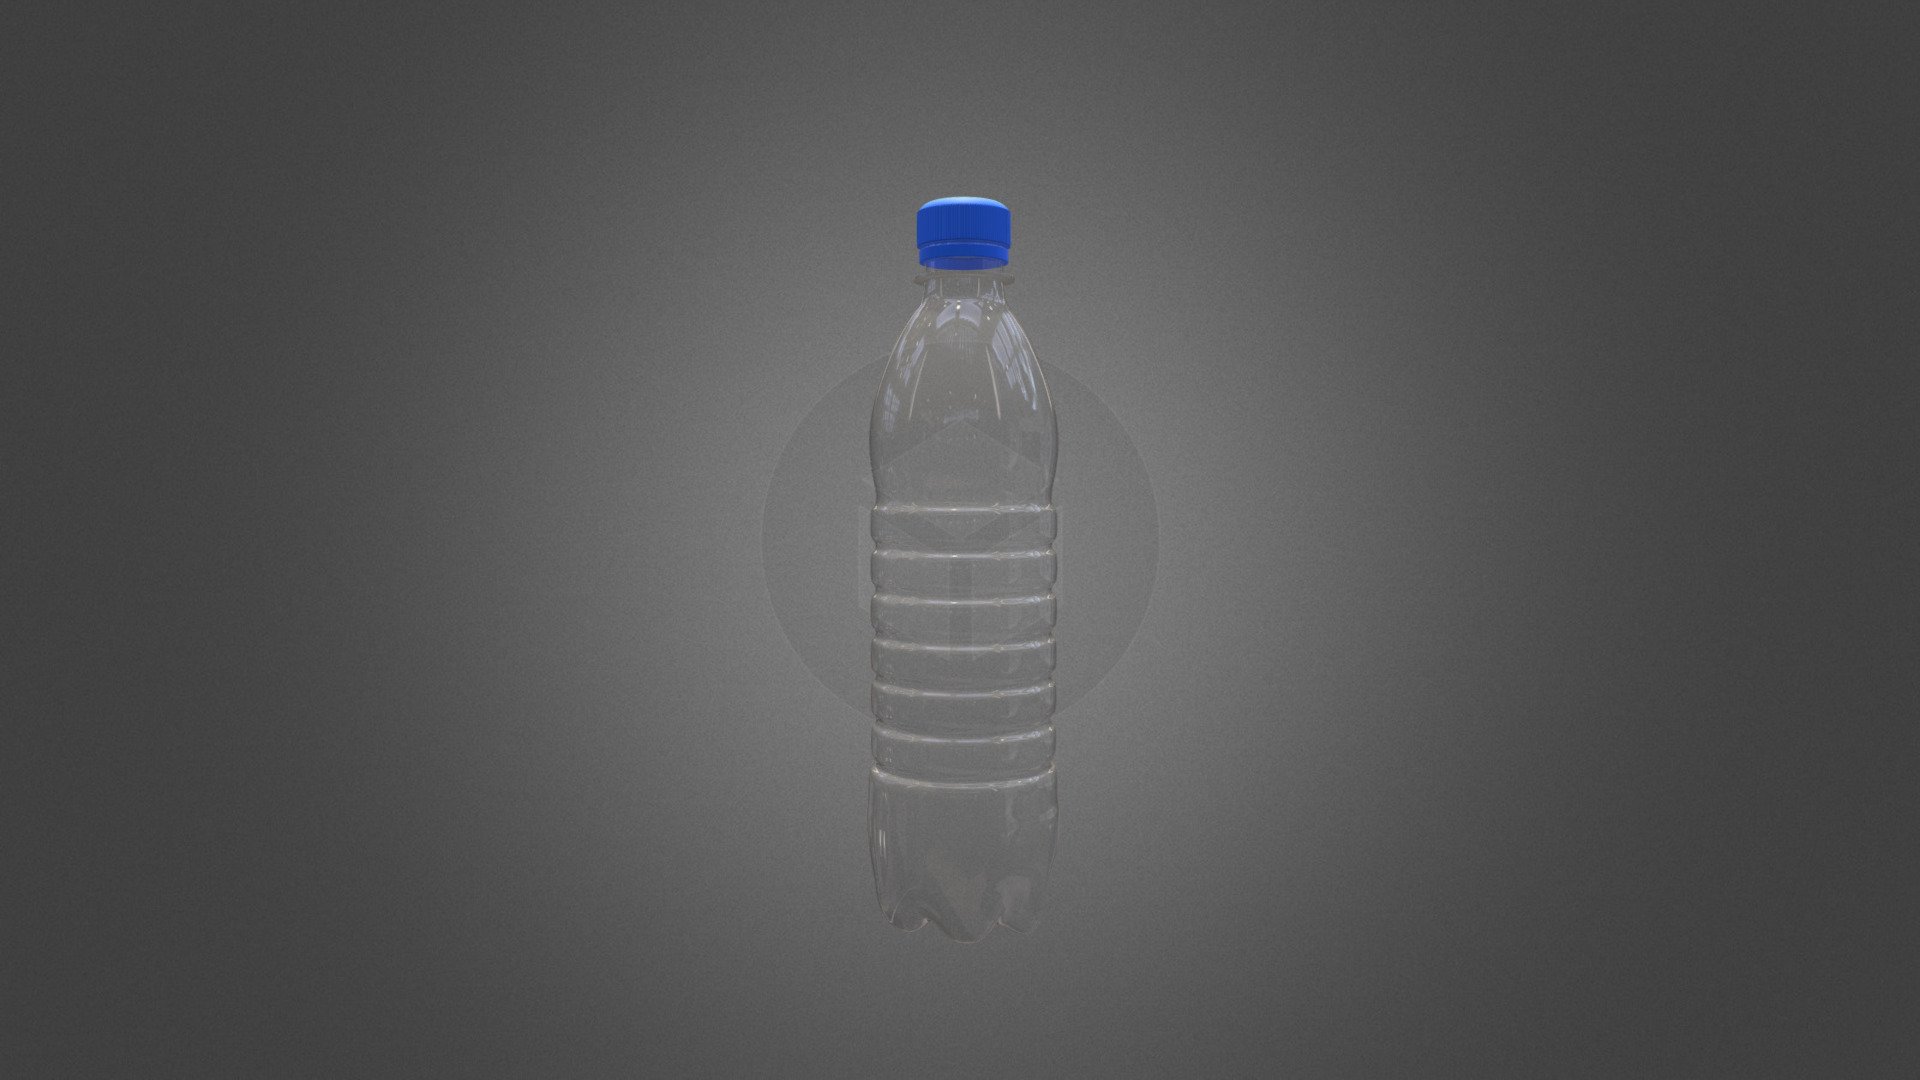 The usual Plastic bottle with a volume of 0.5 liters.Made in blender. It would be nice if you rated the model 3d model